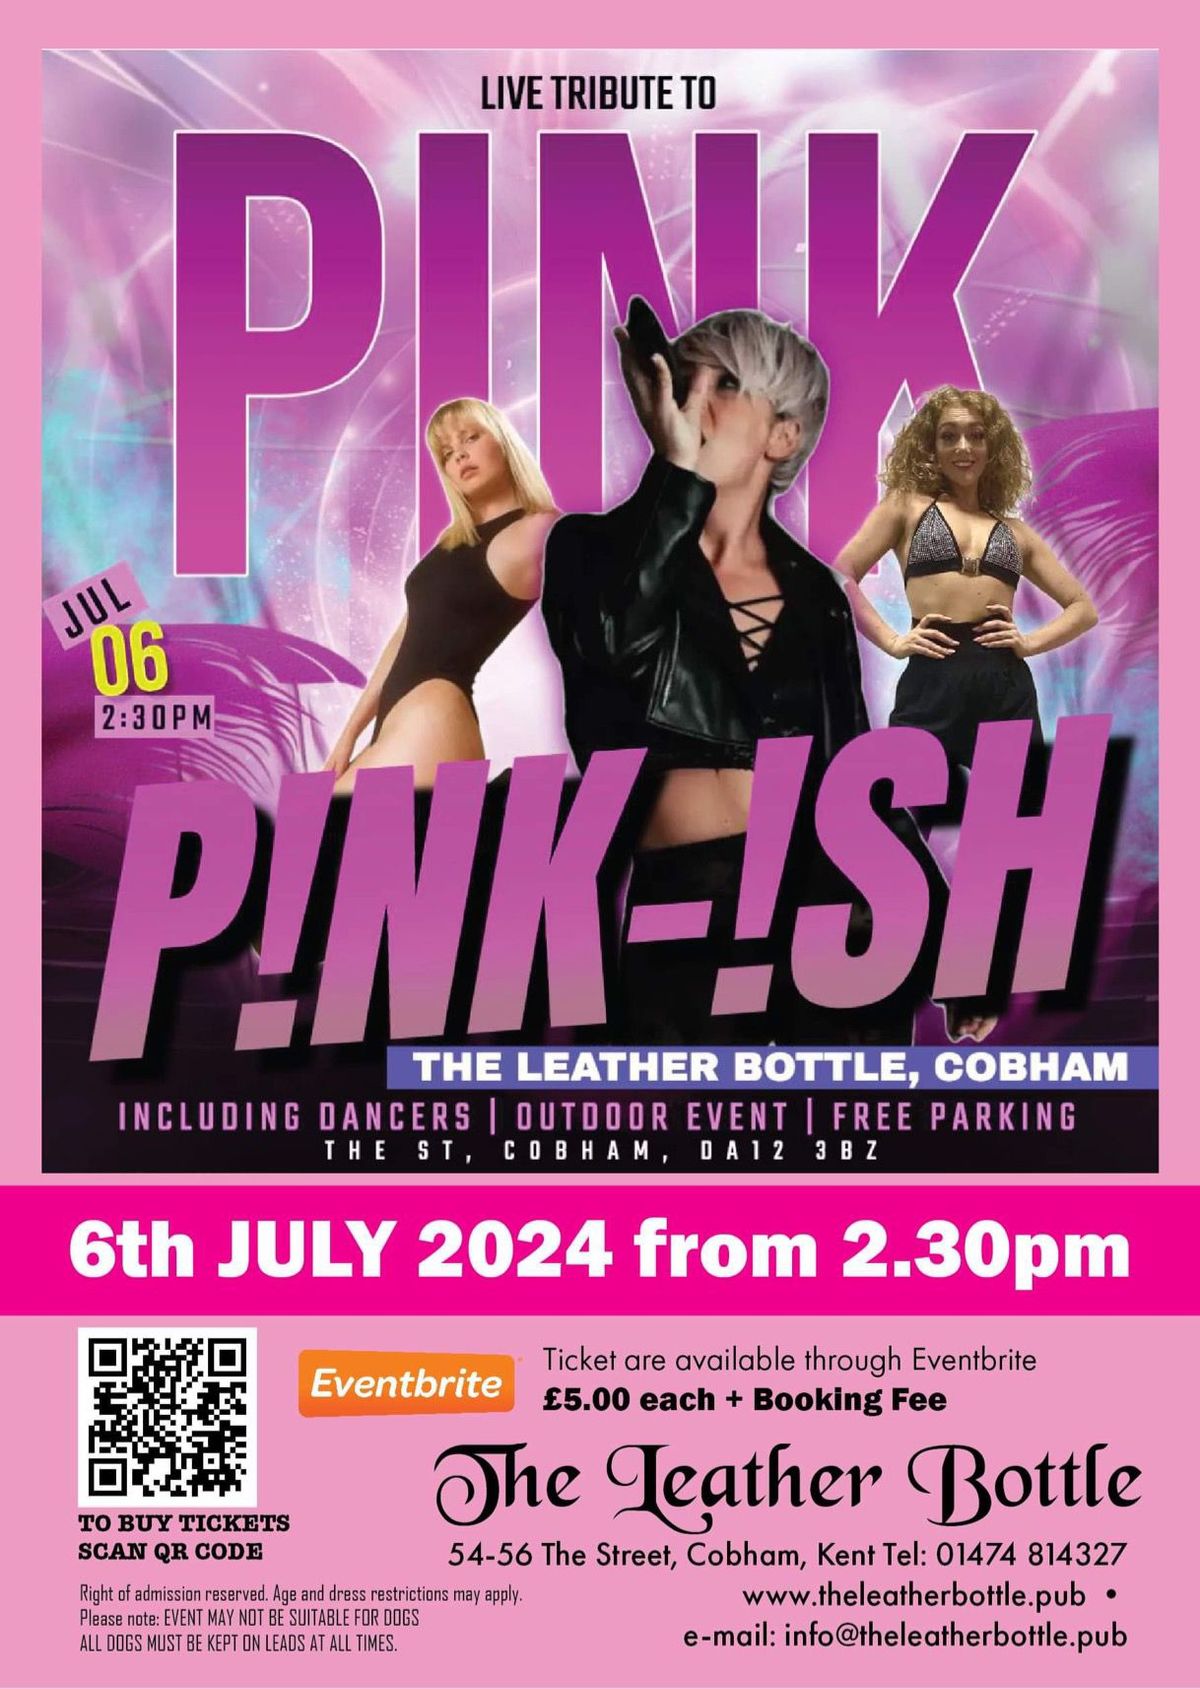 P!NK- !SH - LIVE TRIBUTE TO PINK 